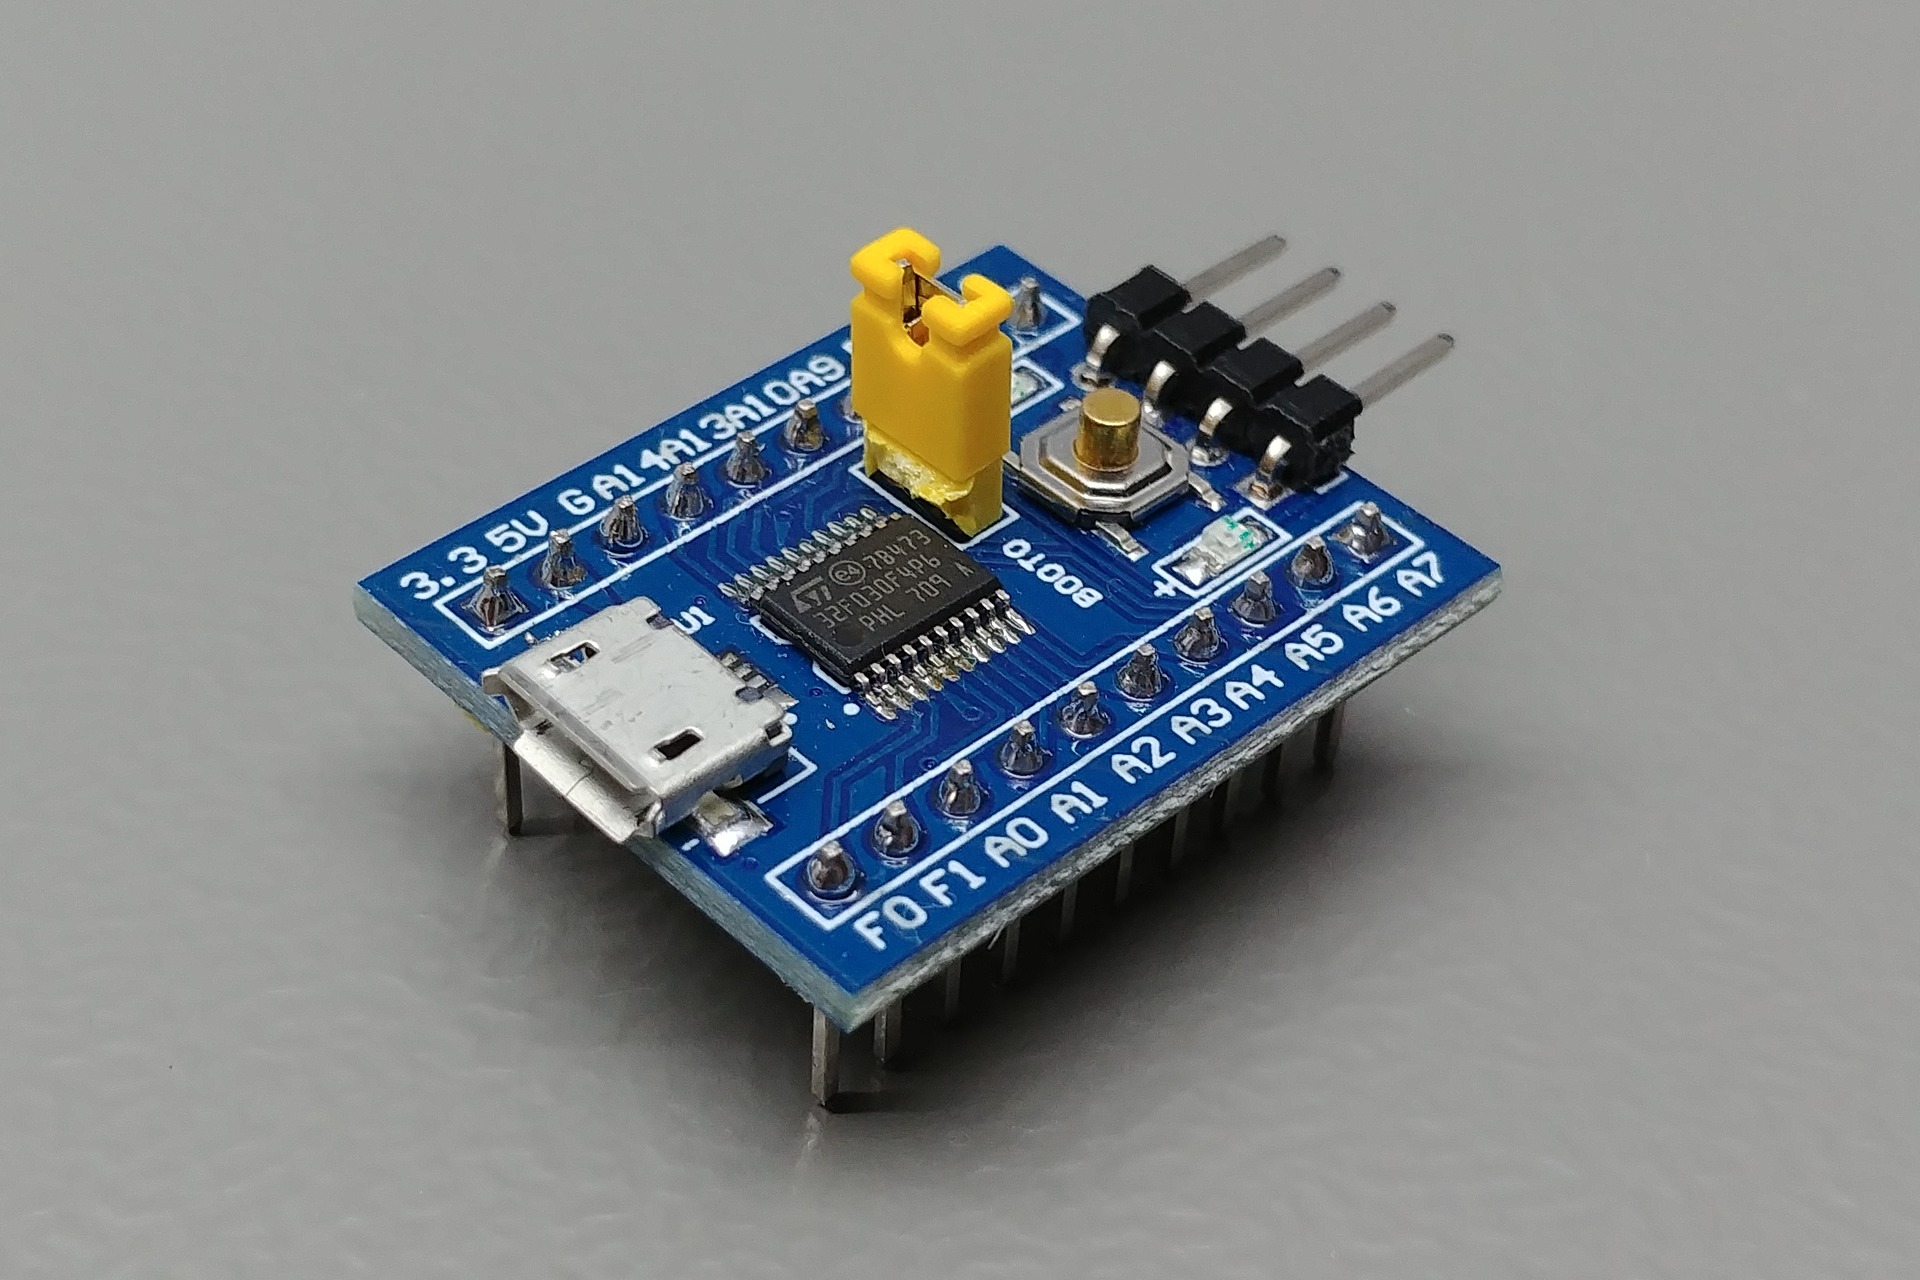 Picture of the vcc-gnd.com STM32F030F4P6